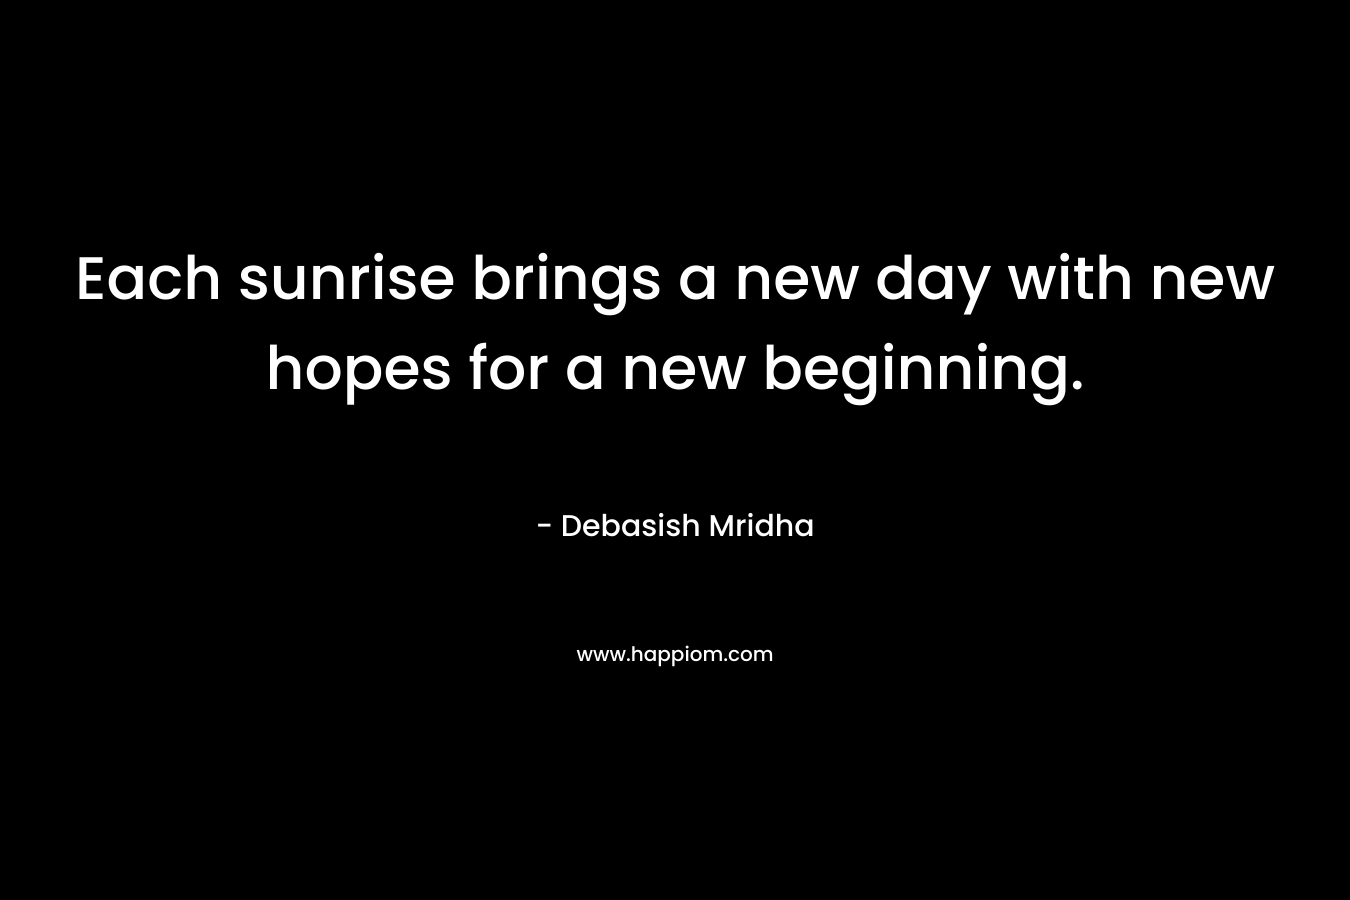 Each sunrise brings a new day with new hopes for a new beginning. – Debasish Mridha